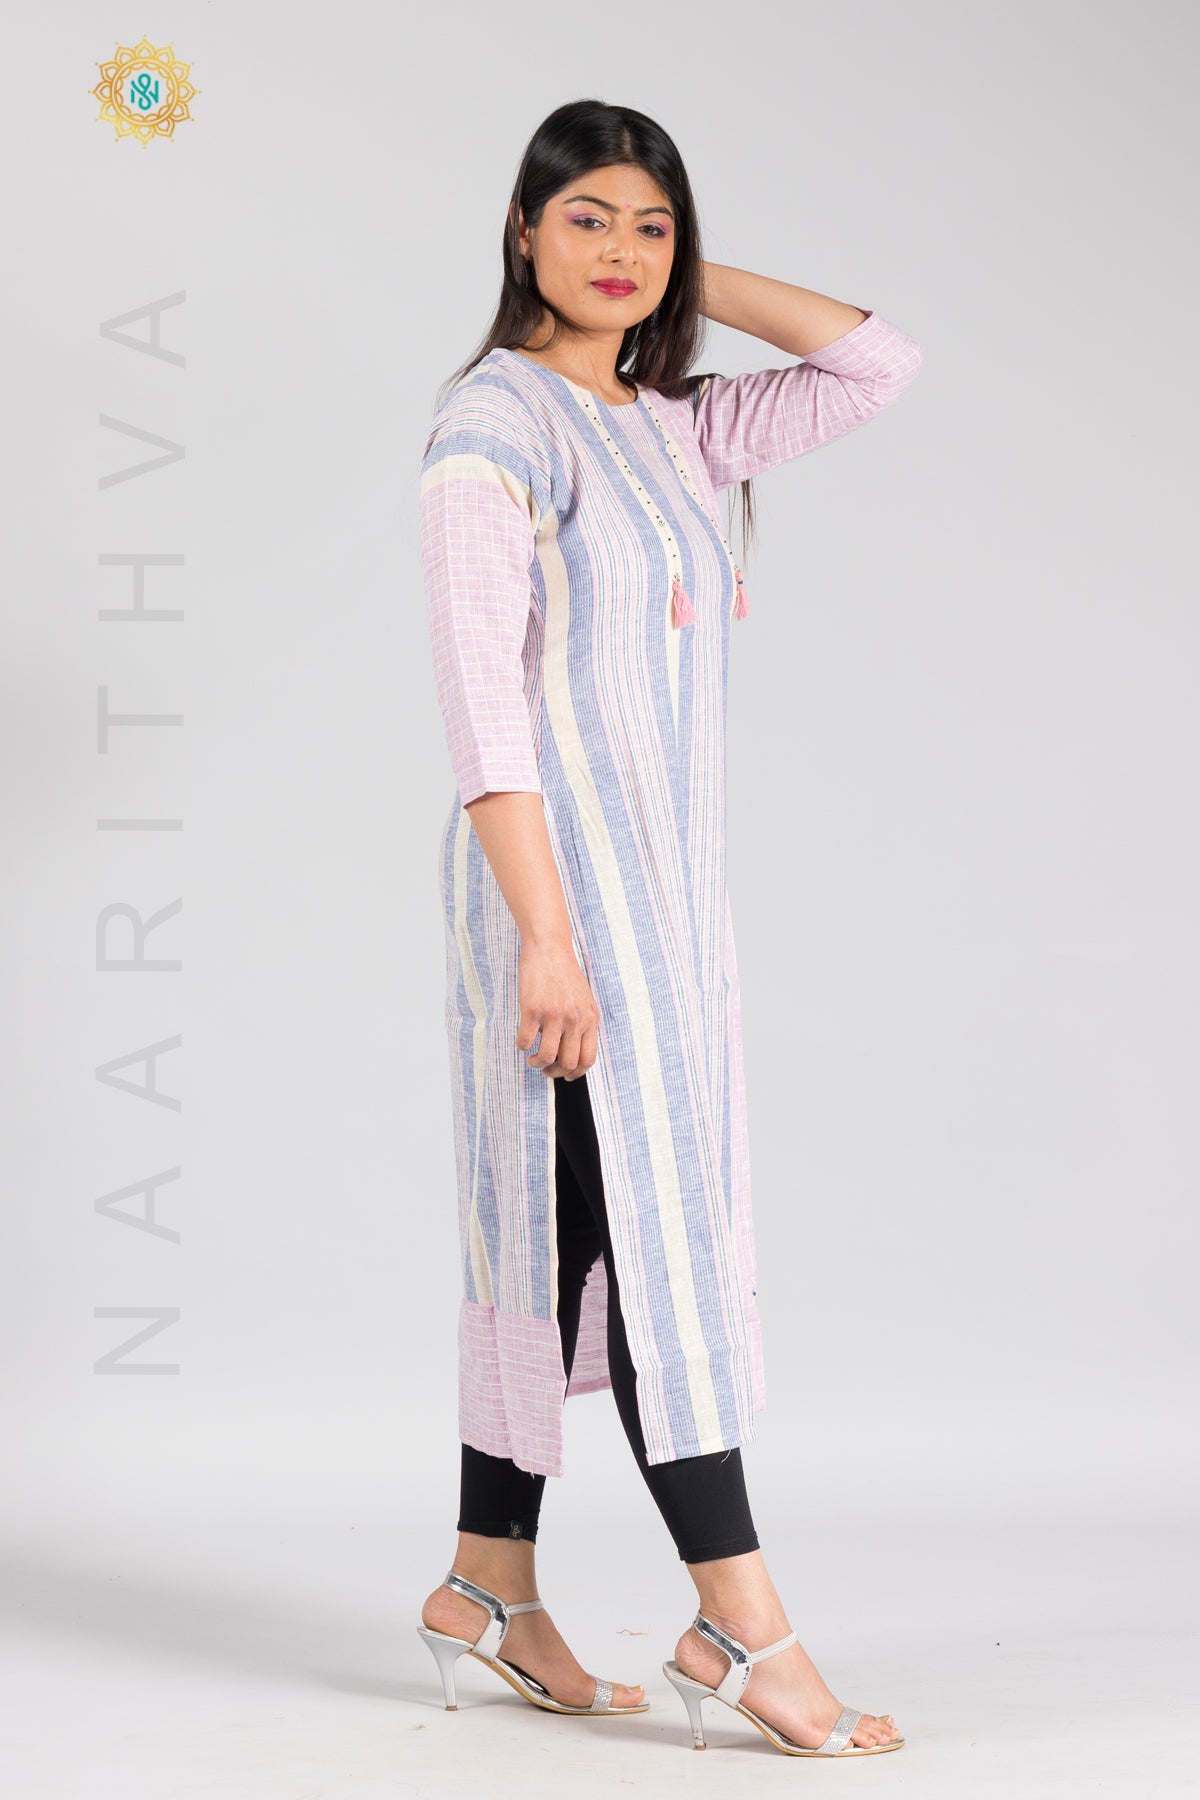 PINK WITH BLUE - COTTON STRAIGHT CUT CASUAL KURTI WITH THREAD EMBROIDERY